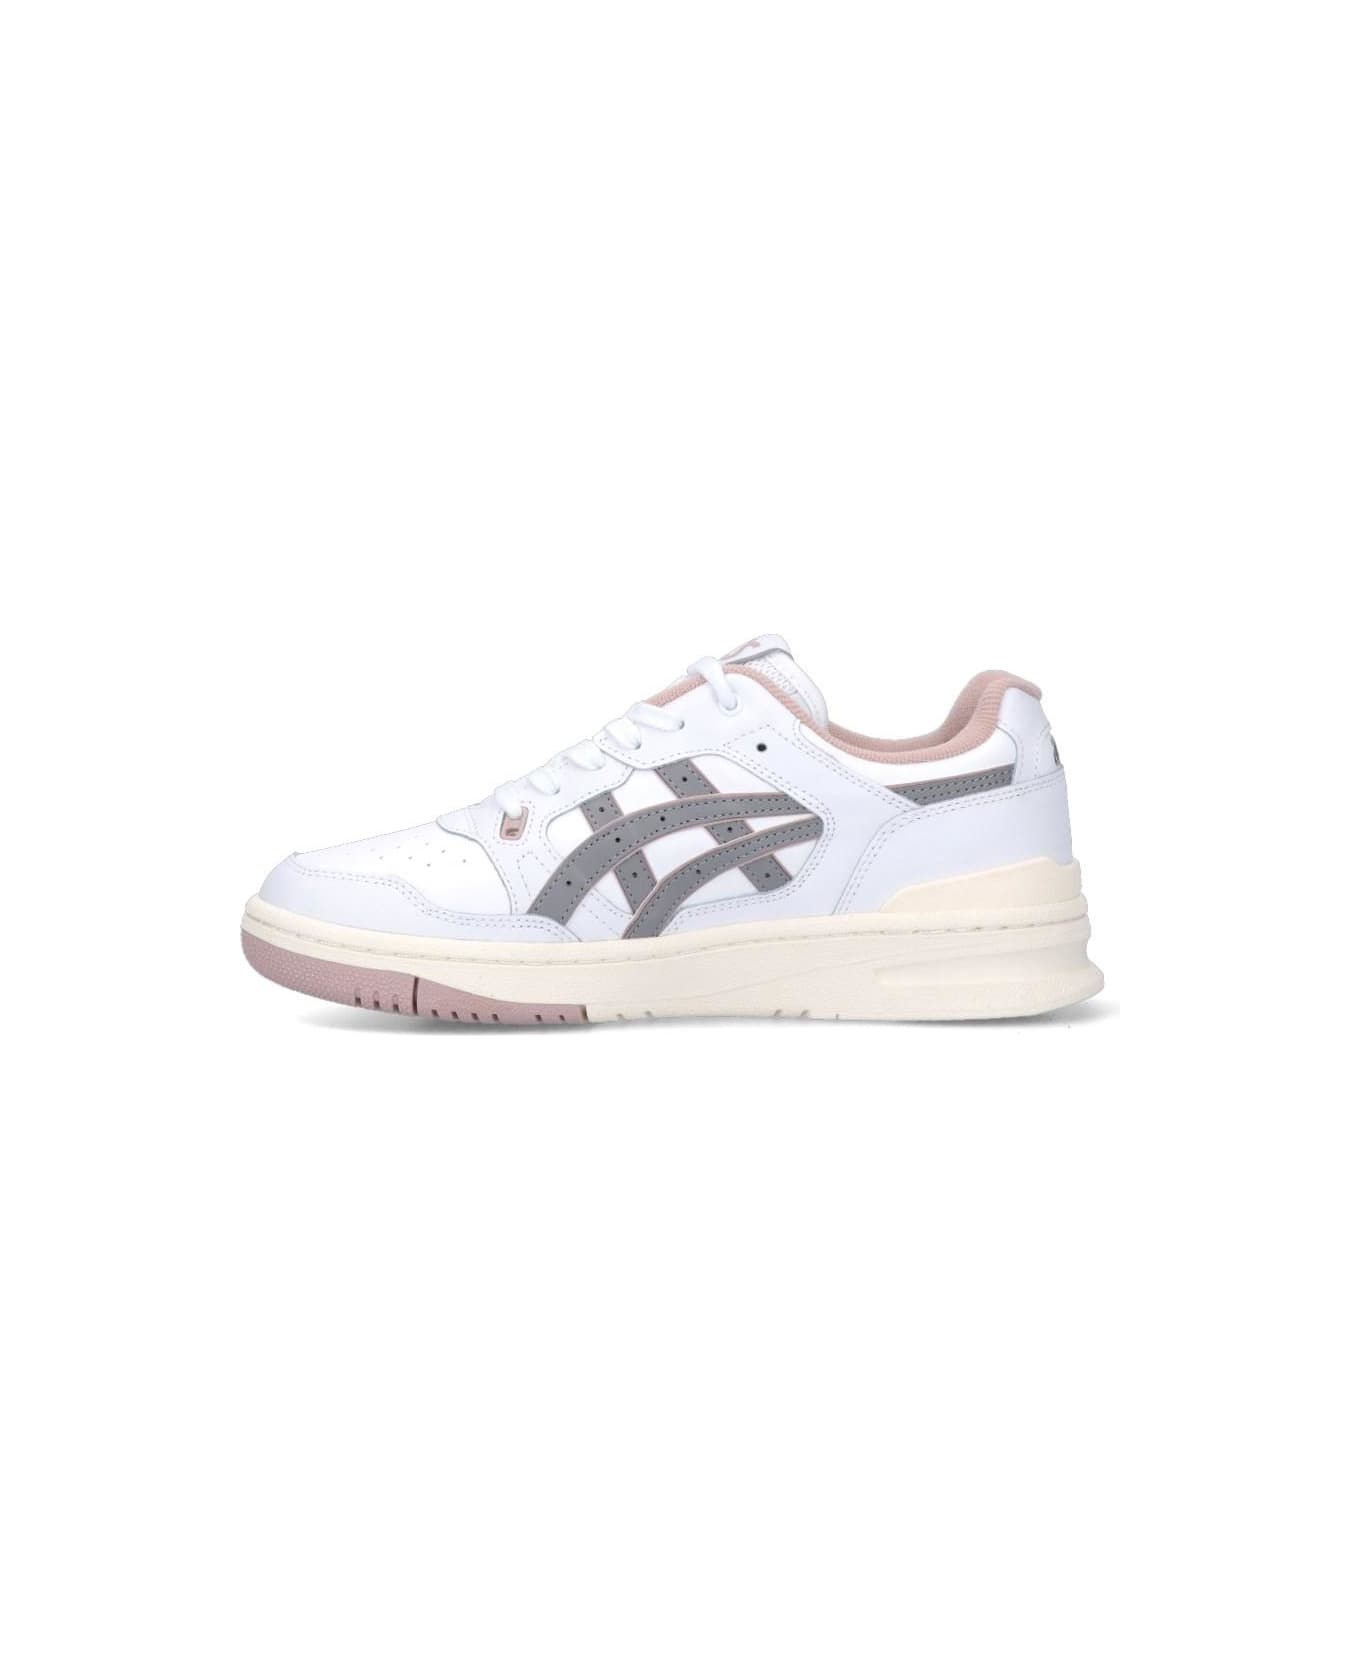 Asics Ex89 Sneakers - White Clay Grey